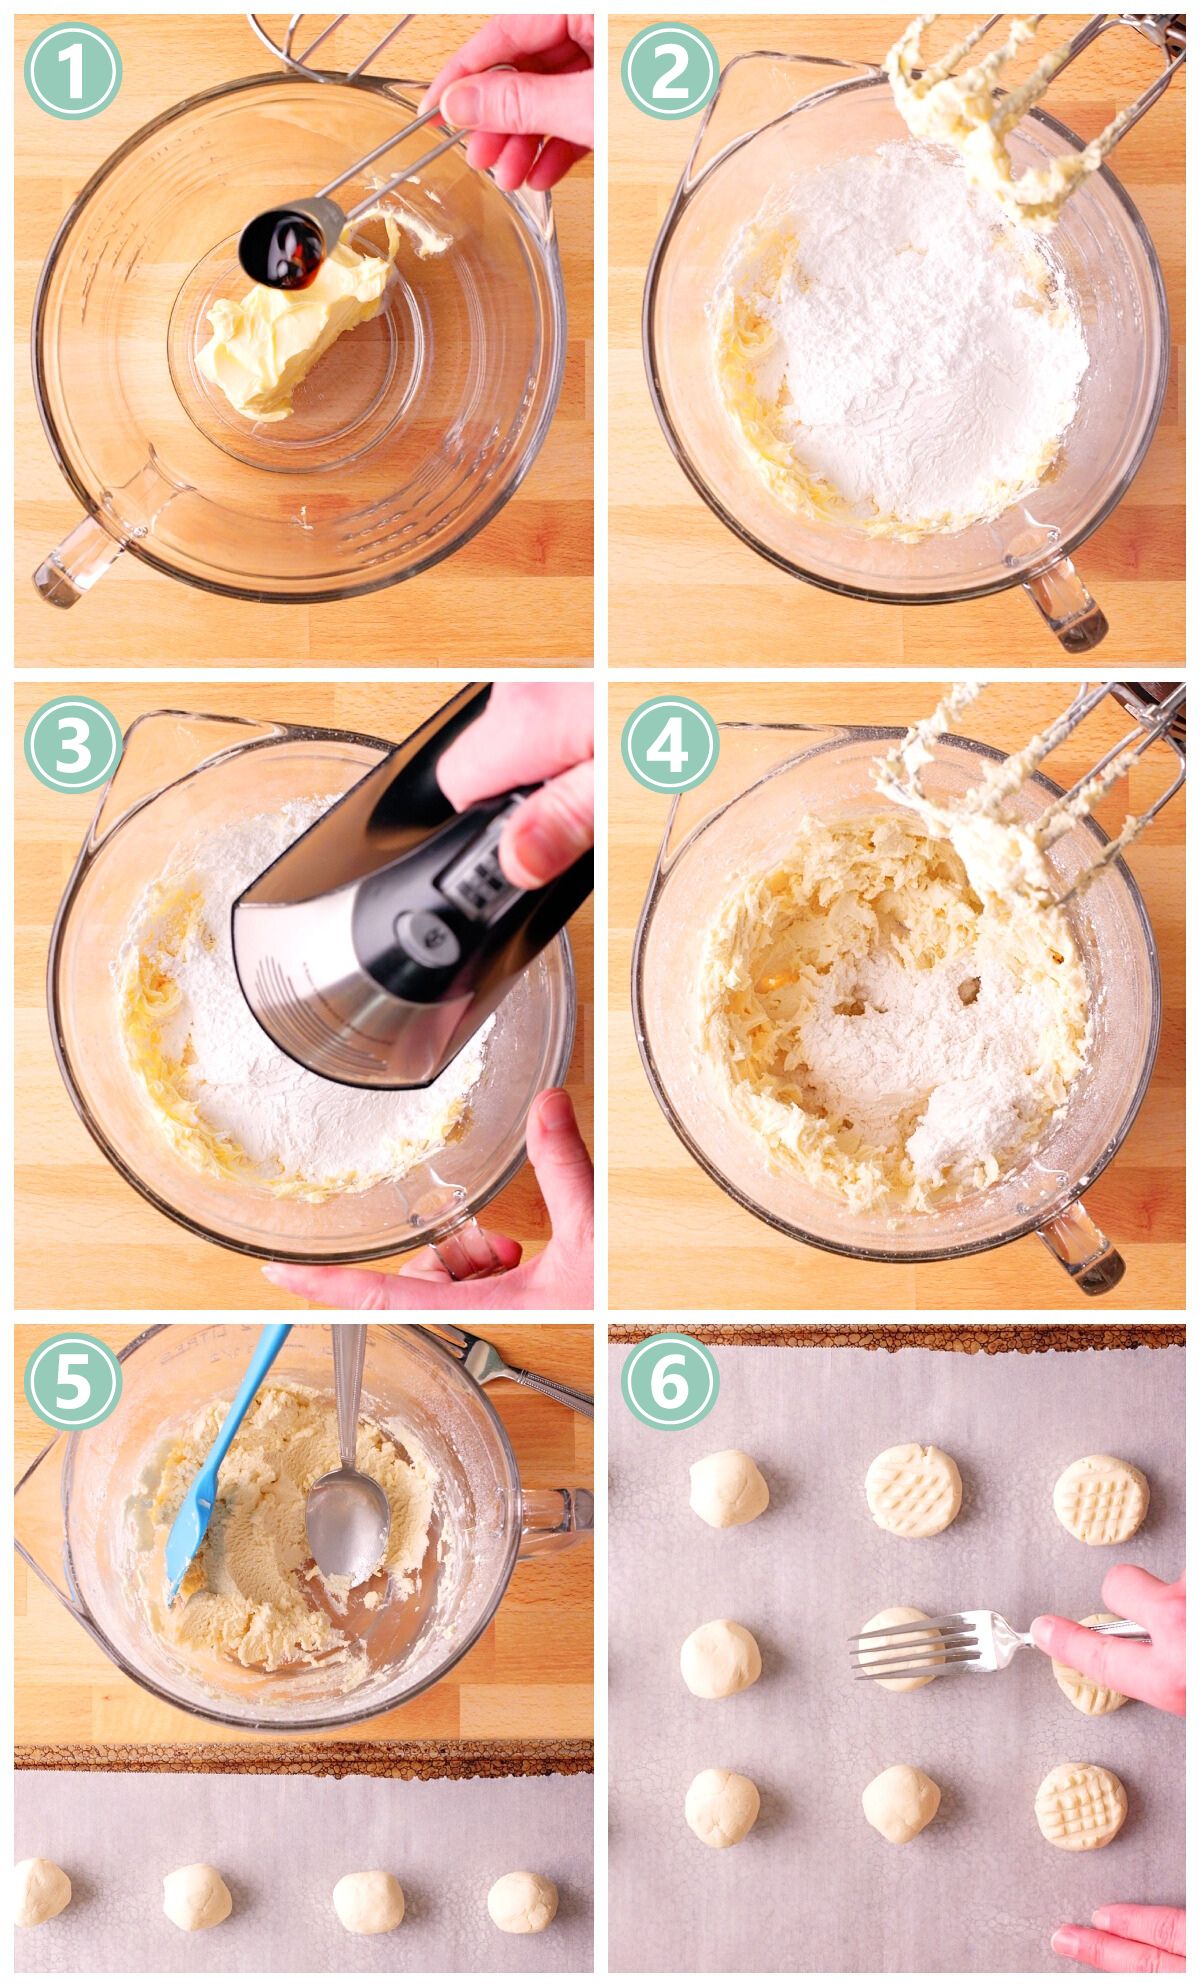 A series of photos showing how to make gluten-free vegan shortbread cookies.